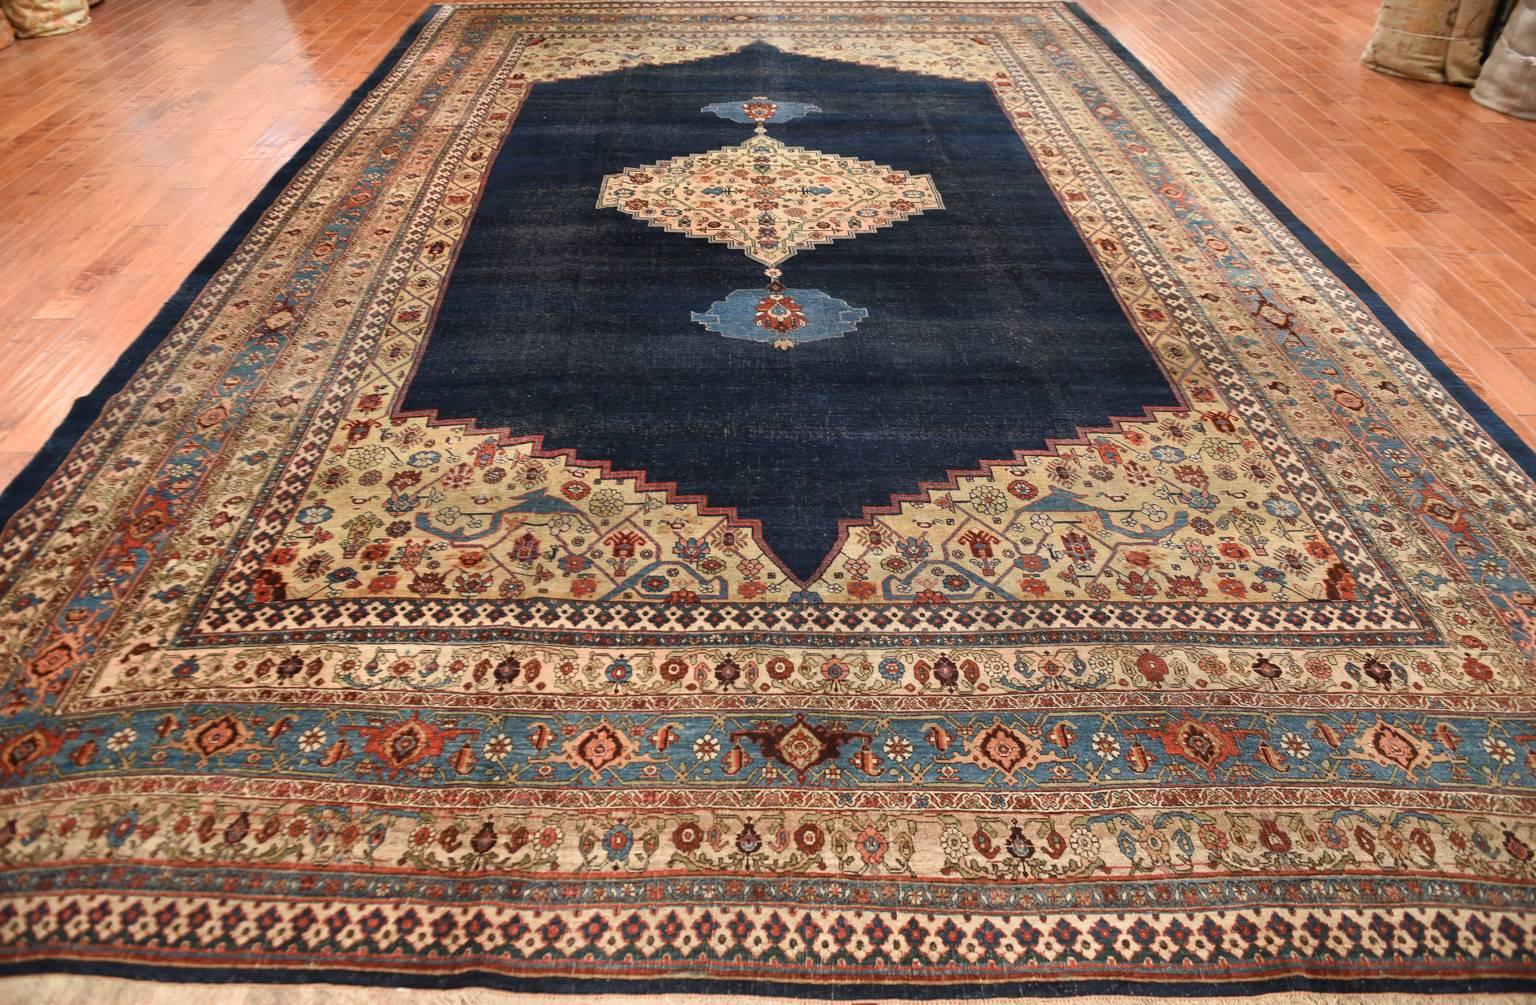 This large powerful Bidjar carpet was woven in the late 19th century in Persia. Bold saturated color intensity complemented with an incredible knot density and strong weave structure. Bidjar knot is made from Ghiordes knot and is wool warp weft and